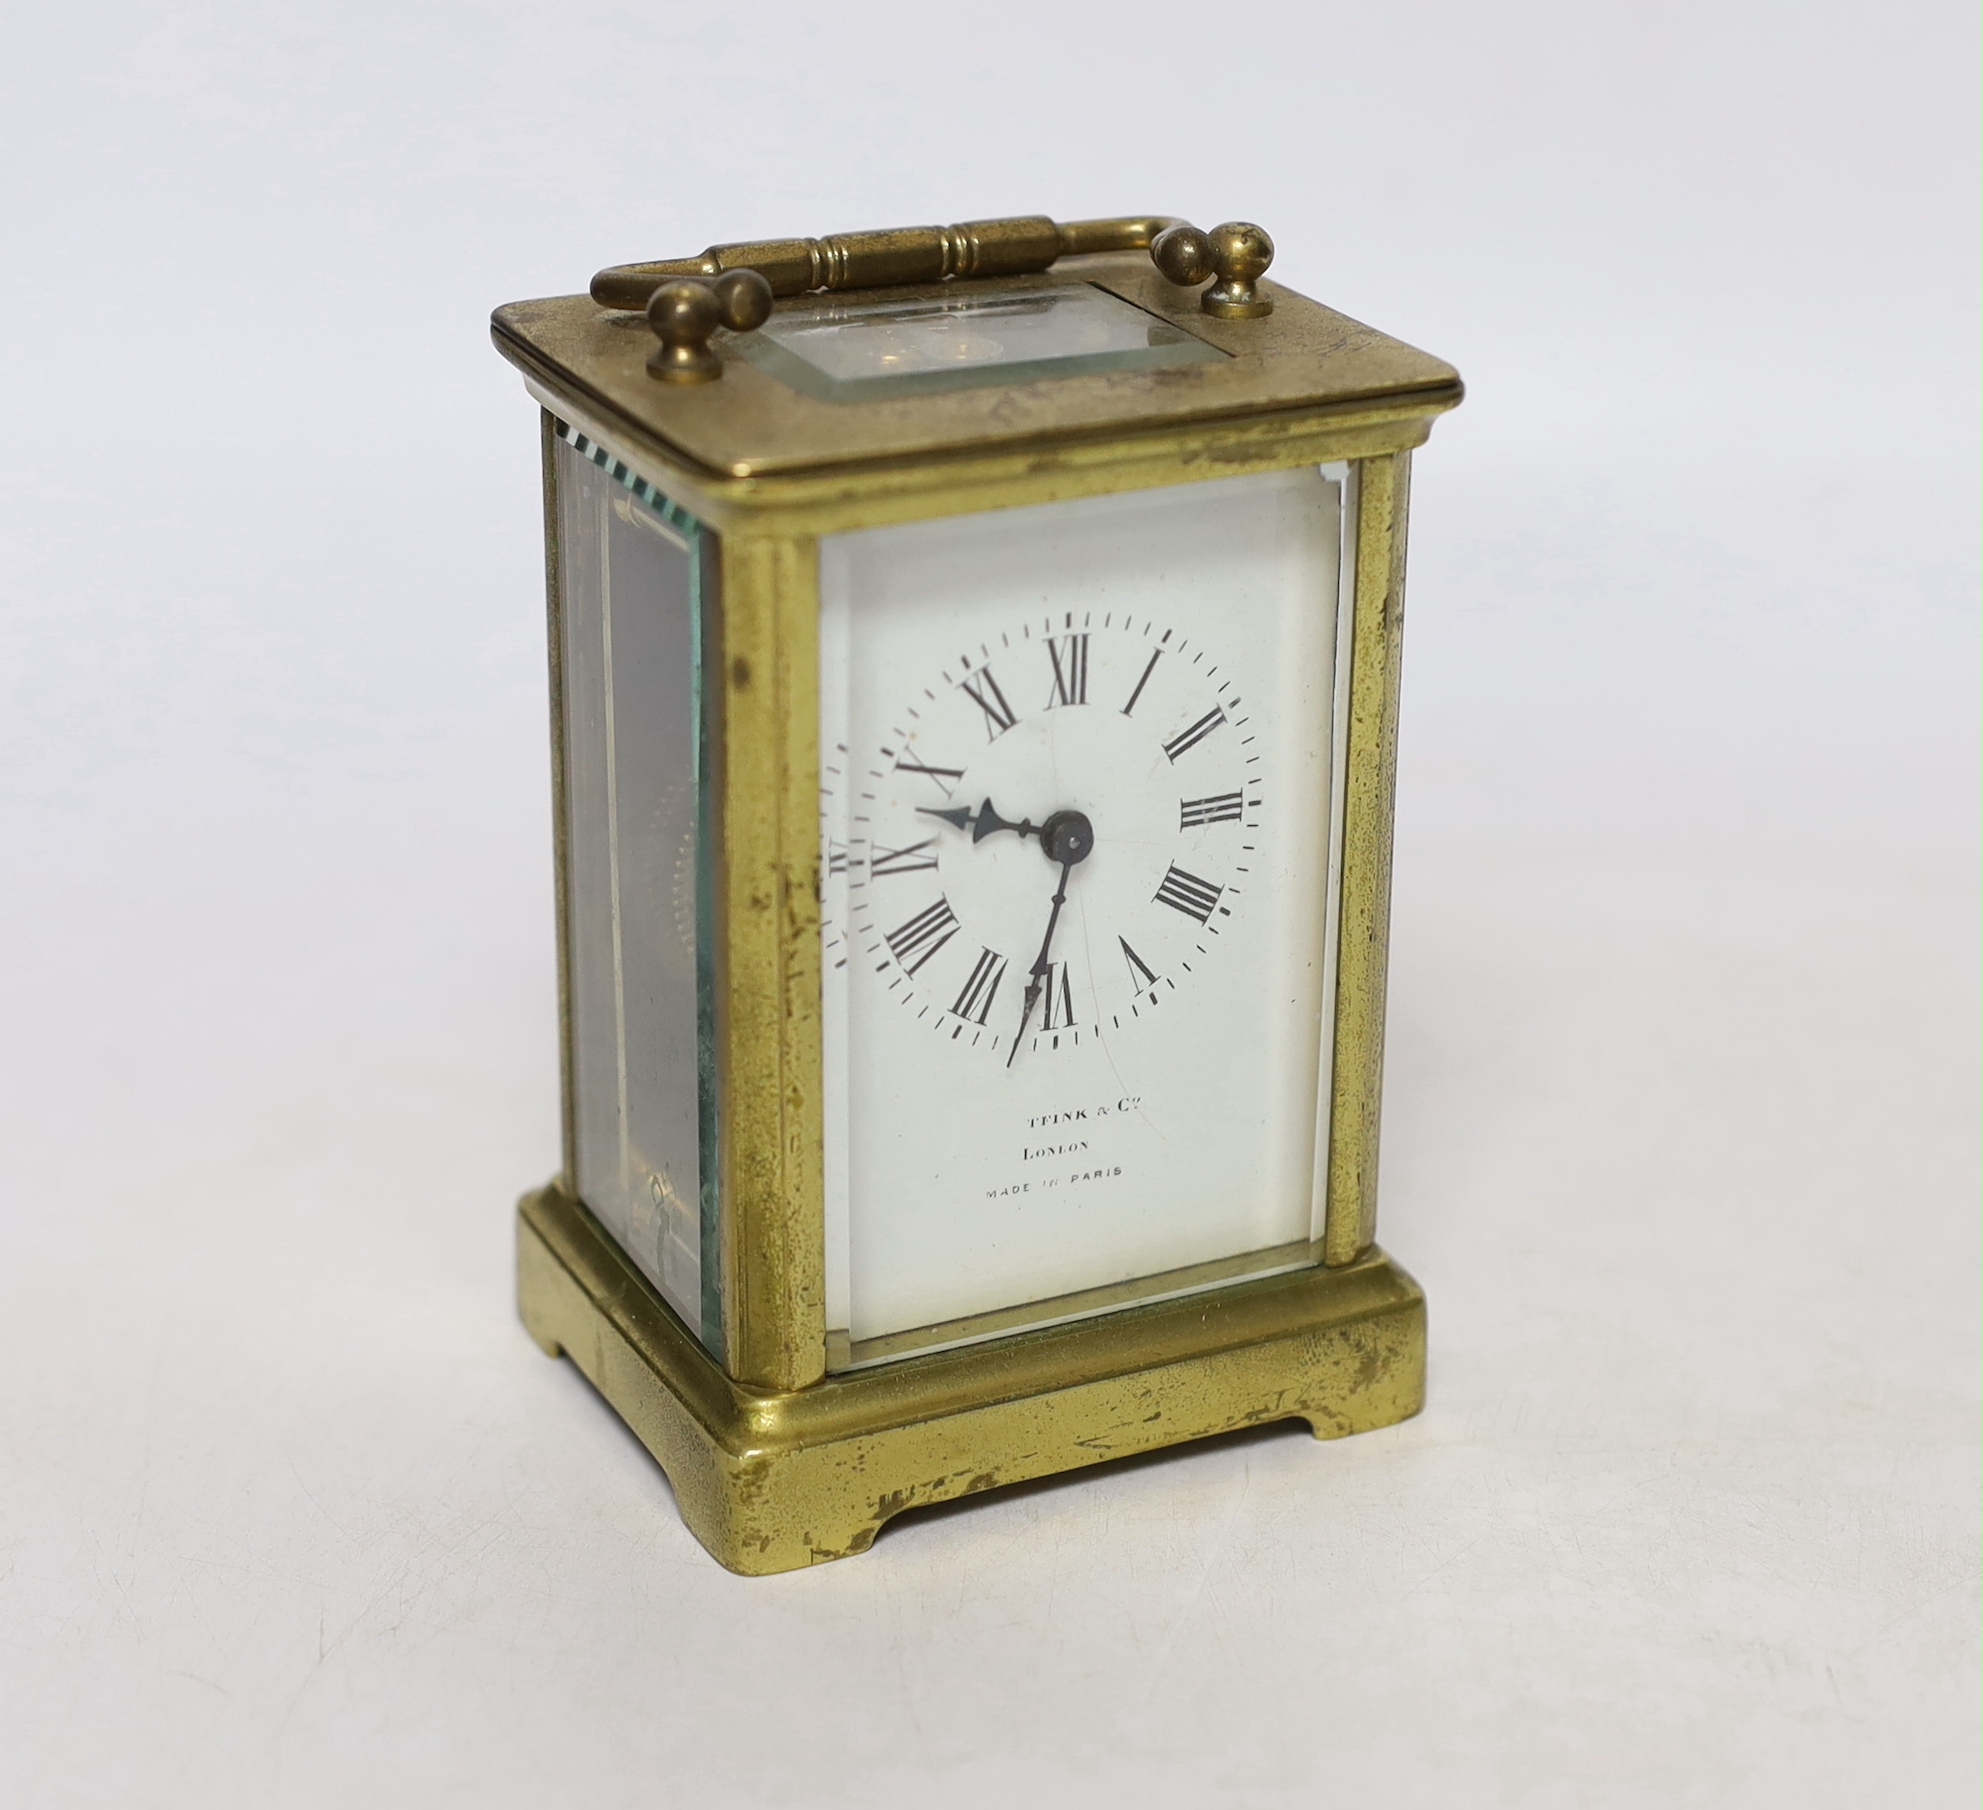 A late 19th century French eight day brass cased carriage timepiece, signed Tfink & Co. London, Made in Paris, 11cm